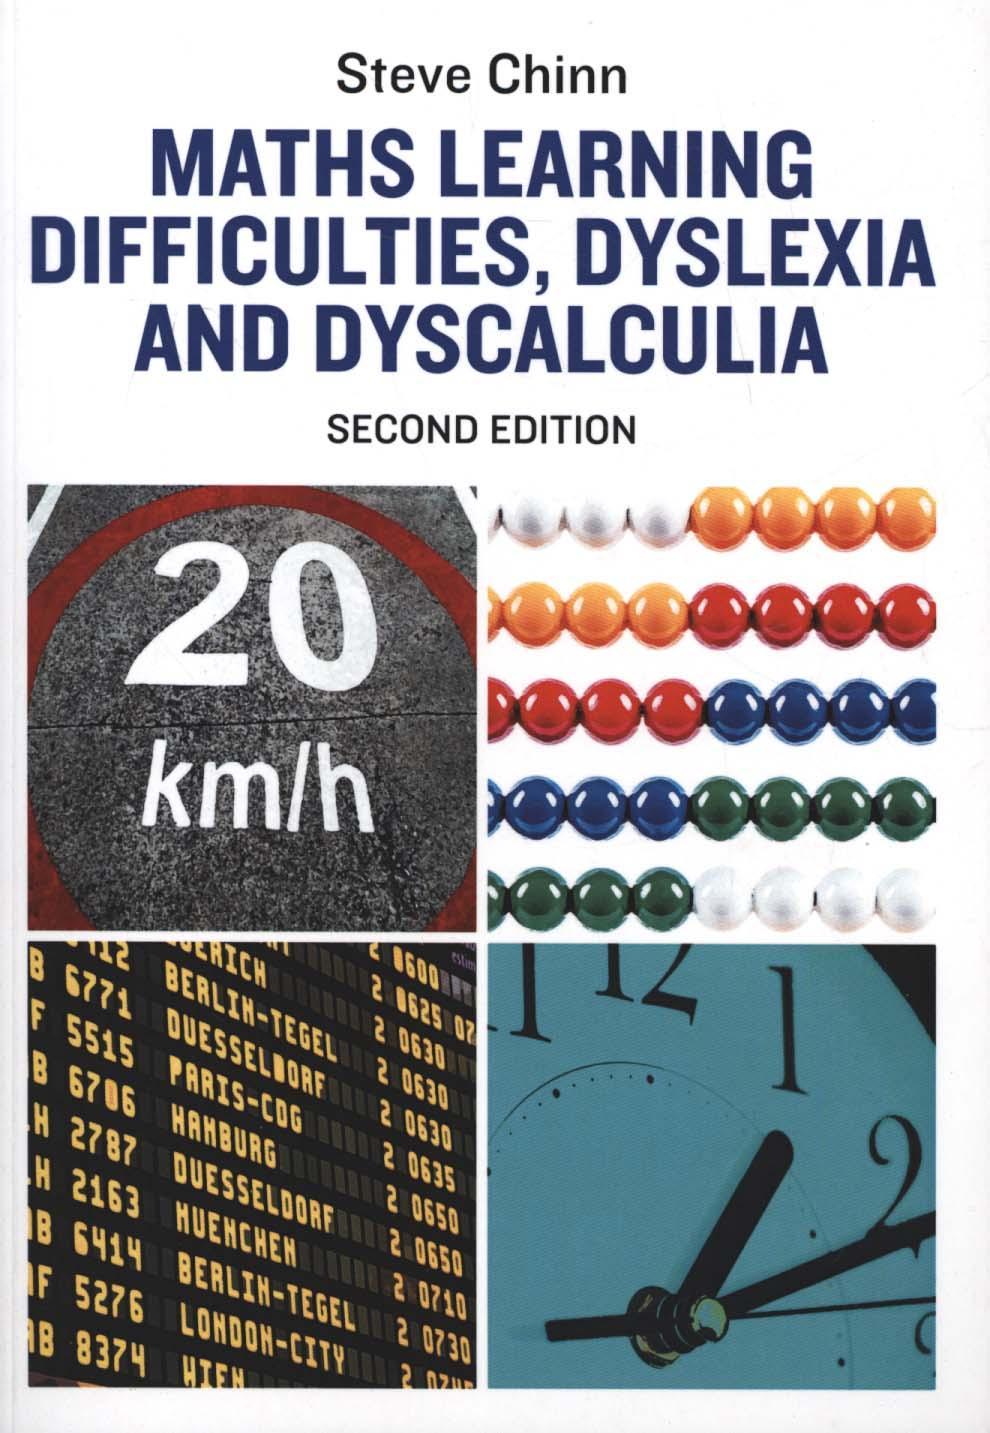 Maths Learning Difficulties, Dyslexia and Dyscalculia